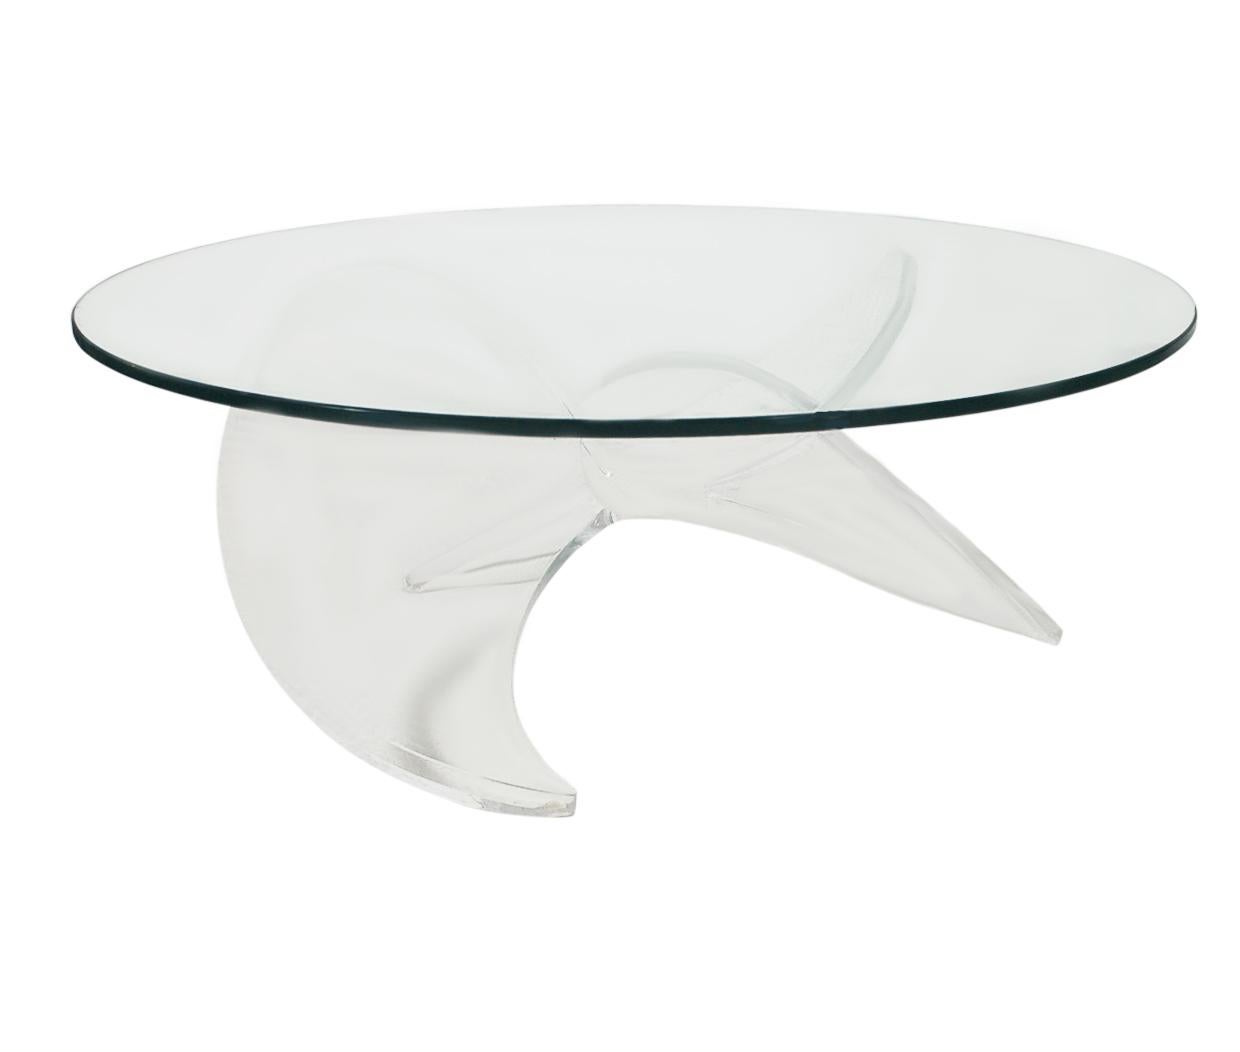 Late 20th Century Mid-Century Modern Propeller Circular Cocktail Table in Lucite & Glass